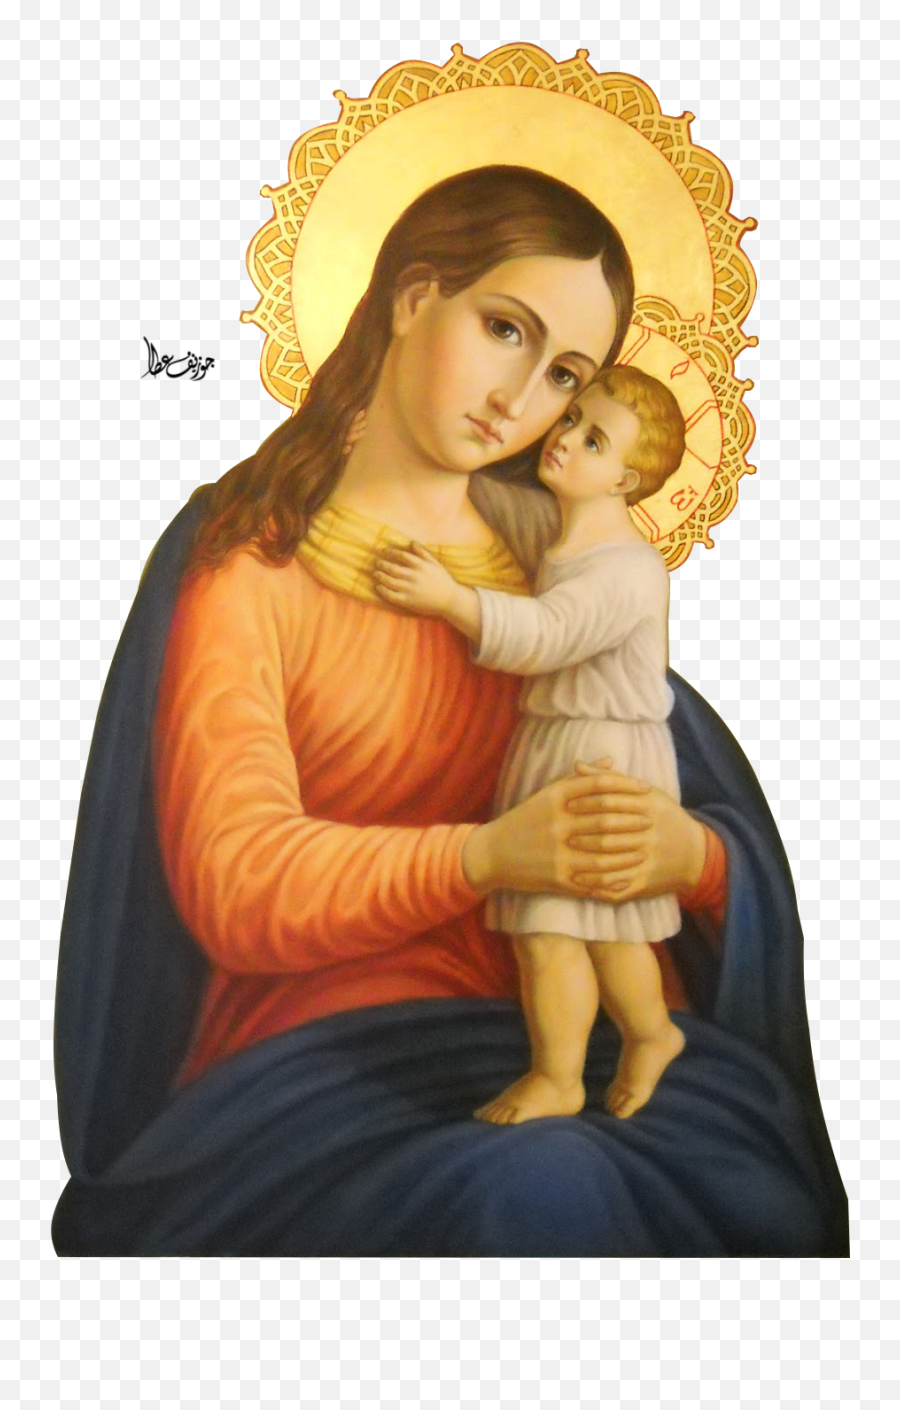 Virgin Mary Png - Baby Jesus And Mary,Virgin Mary Png